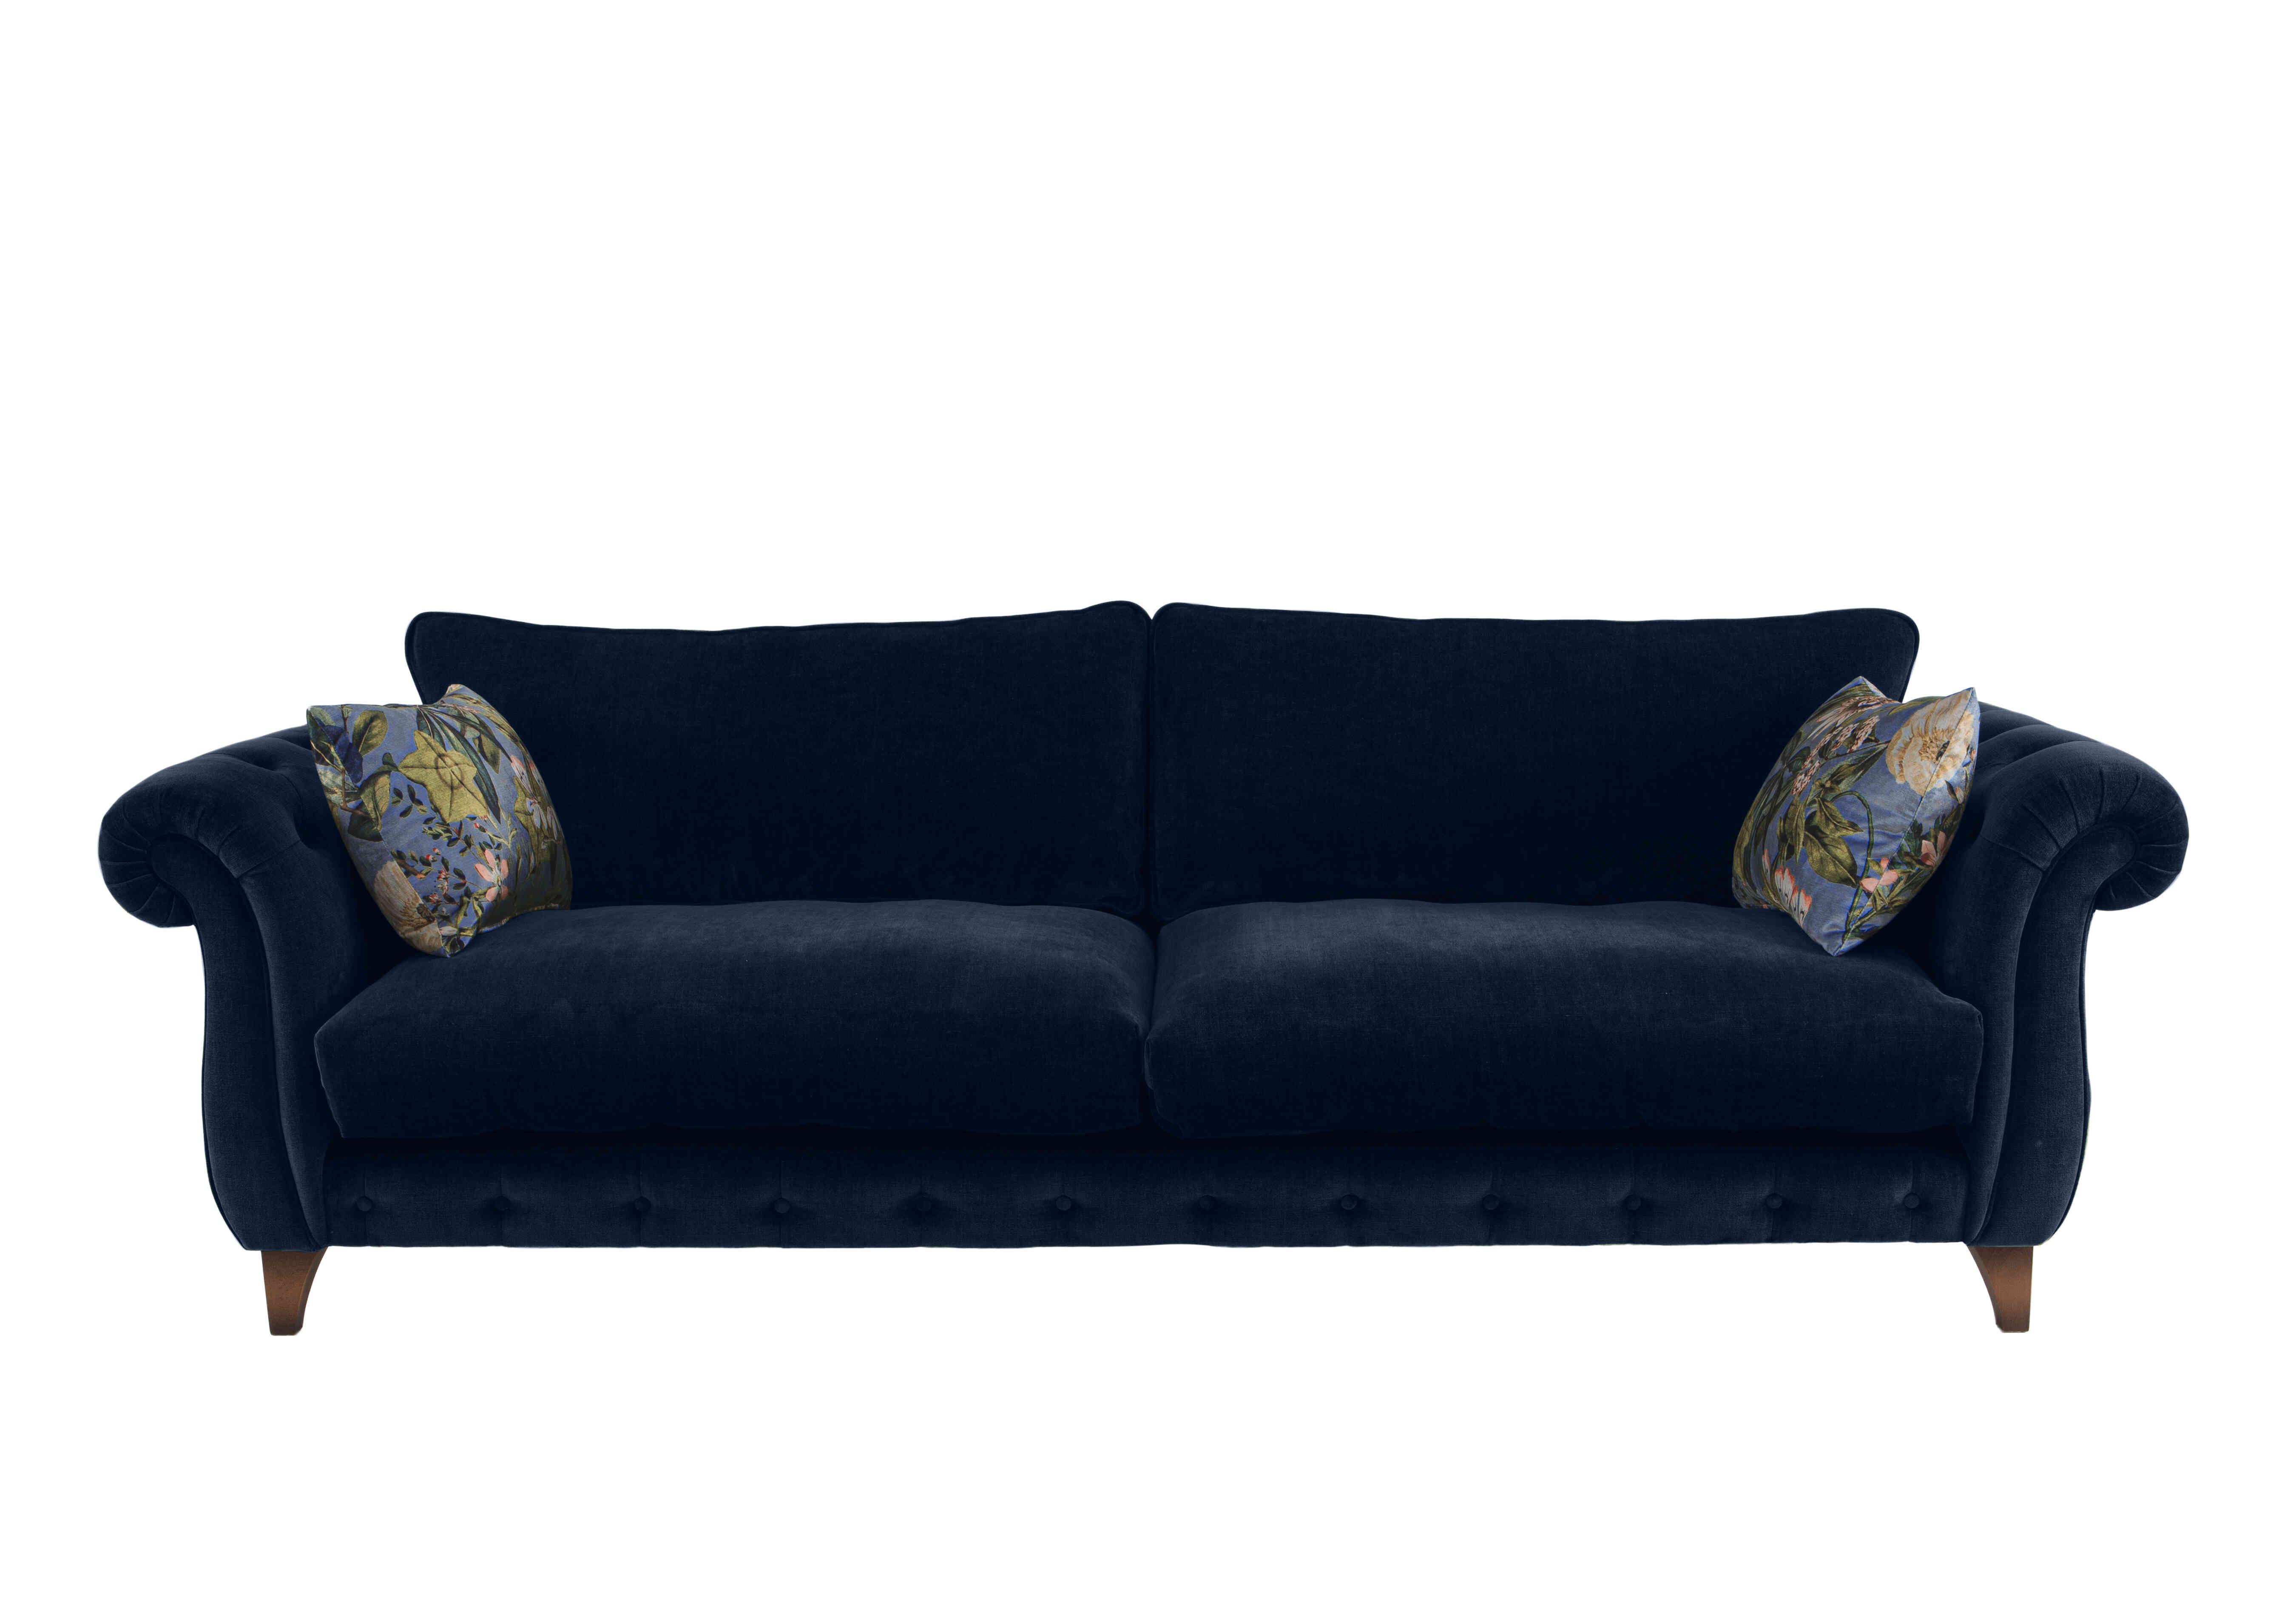 Boutique Palace Fabric 4 Seater Classic Back Sofa in Oasis Navy on Furniture Village